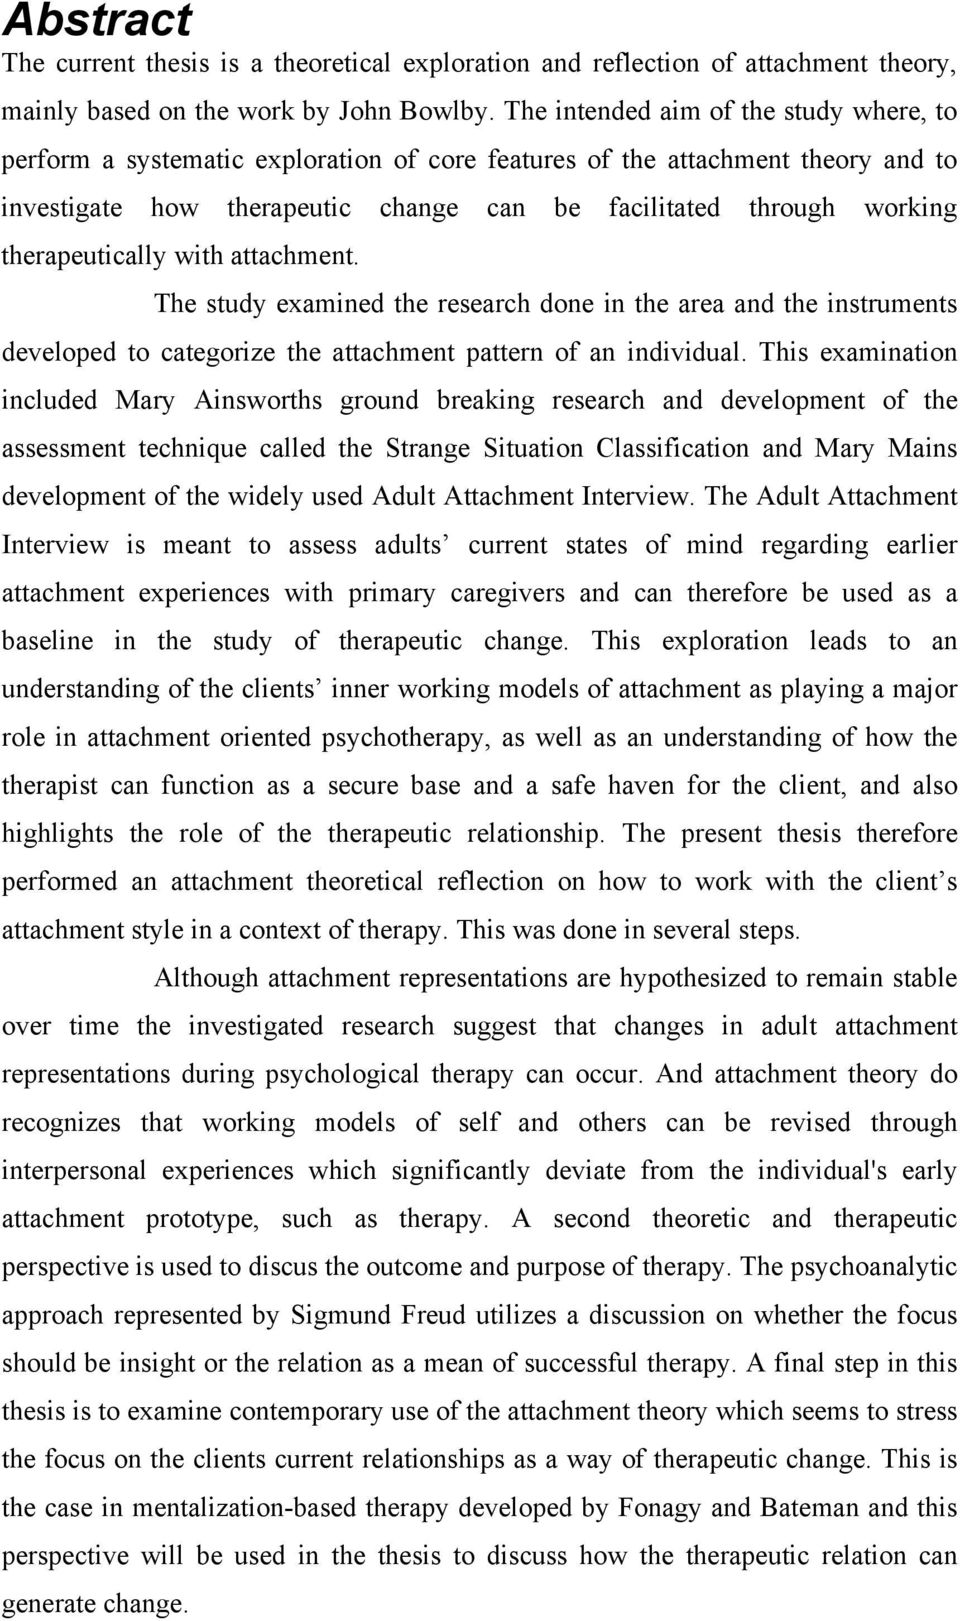 therapeutically with attachment. The study examined the research done in the area and the instruments developed to categorize the attachment pattern of an individual.